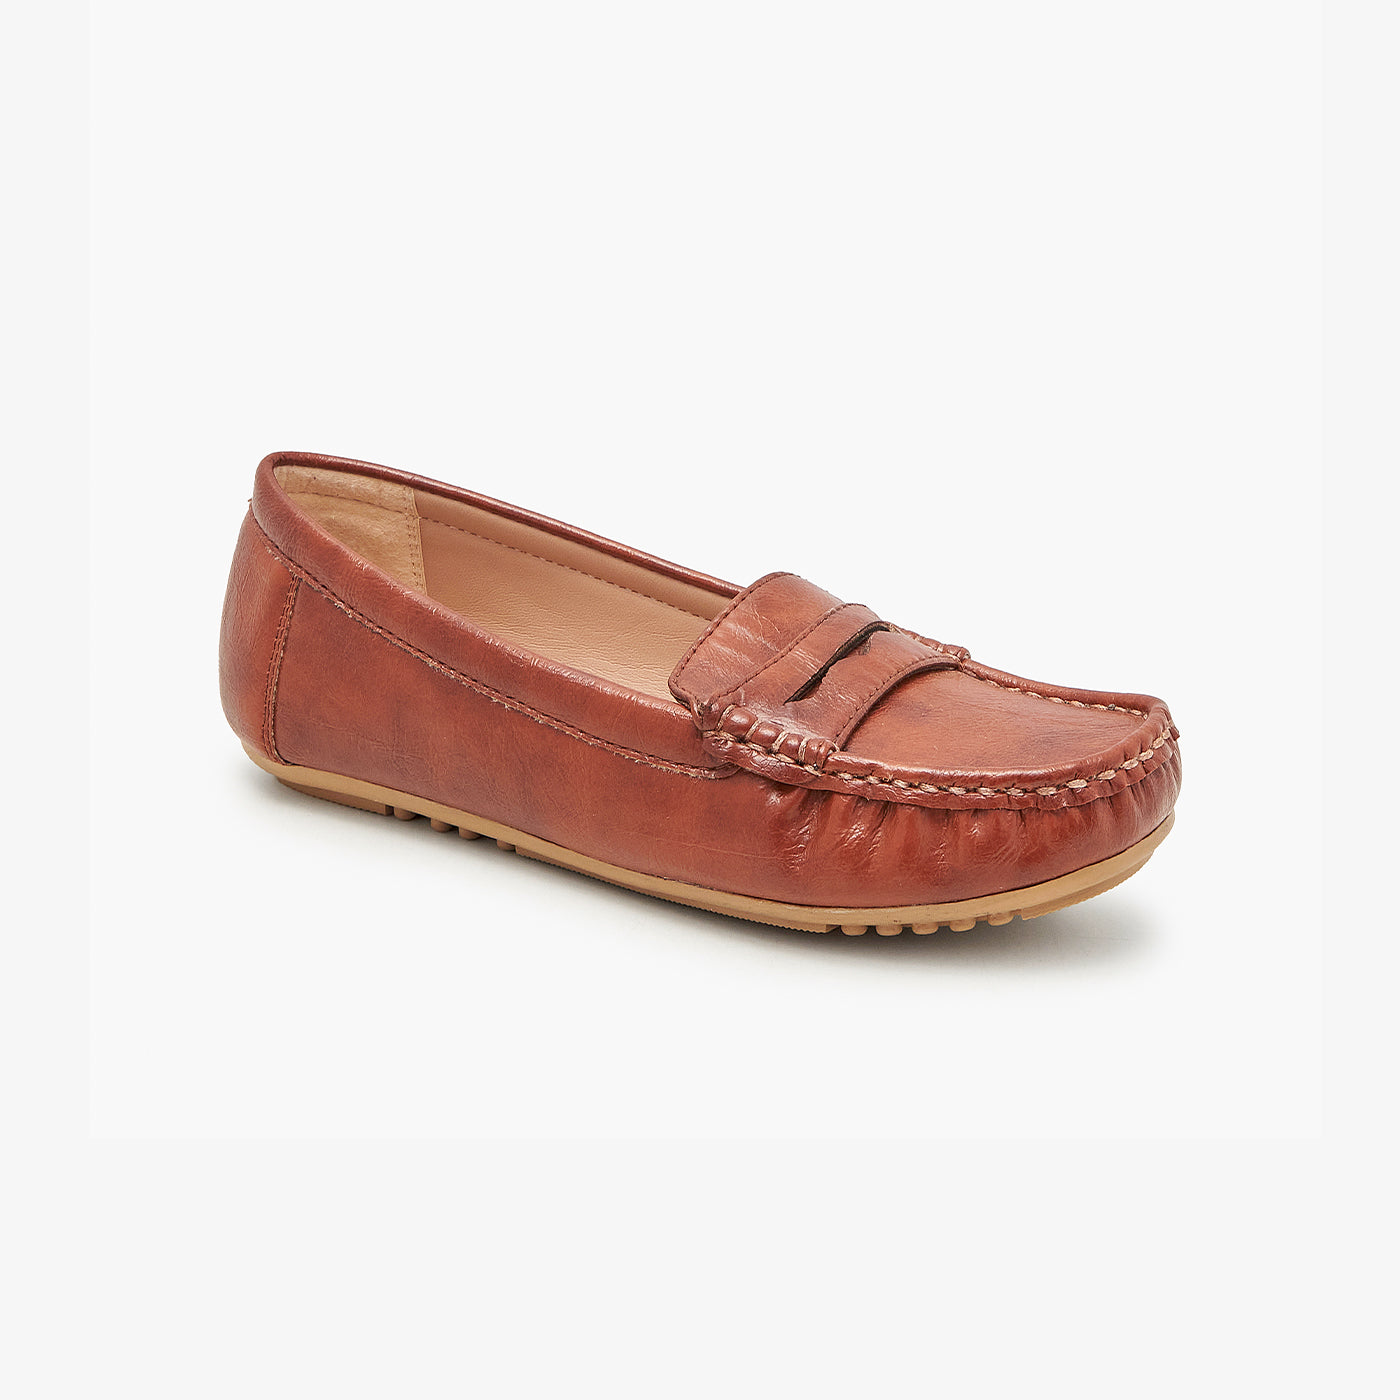 Moccasins for Women